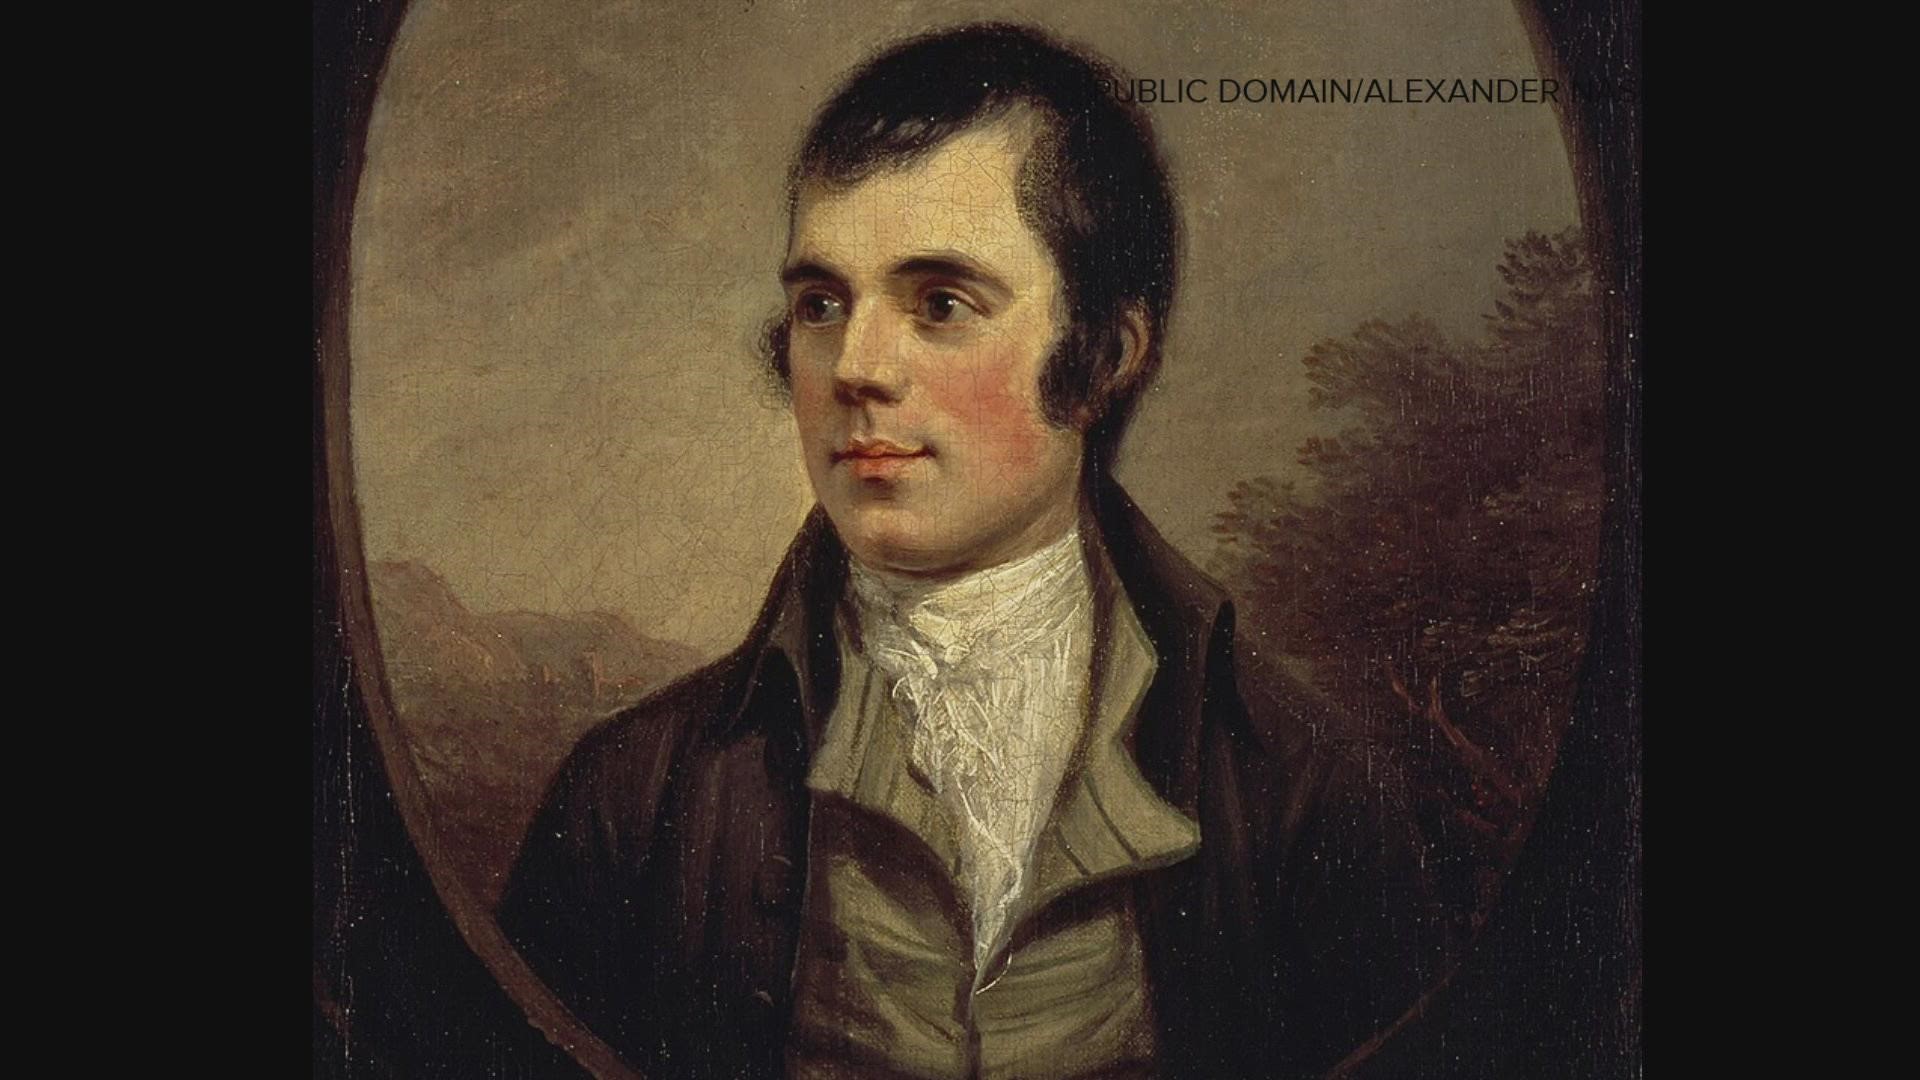 For those who celebrate, Burns night features a special dinner, full of poetry, Scotch whiskey, and haggis. Burns died 227 years ago, but his legacy lives on.